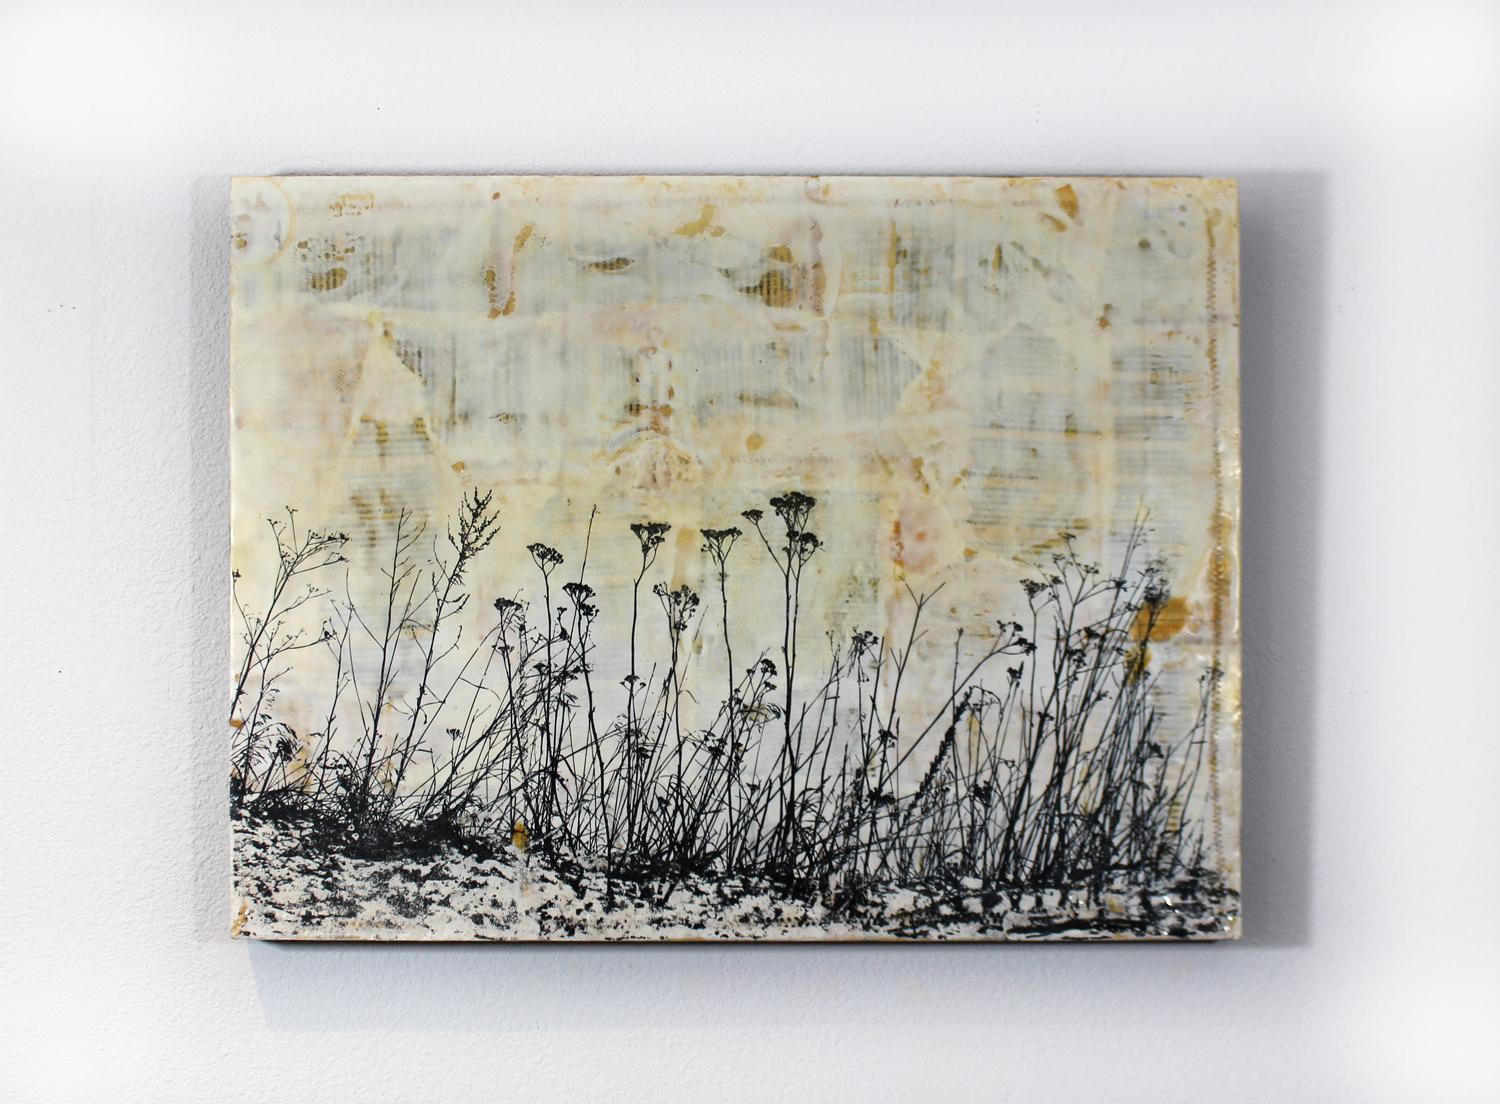 <p>Artist Comments<br>WIldflowers and grass swaying in the wind on a mica beach. This beautiful encaustic painting creates a relaxing, moody escape. The background is made up of a variety of vintage ephemeral materials including old book pages,